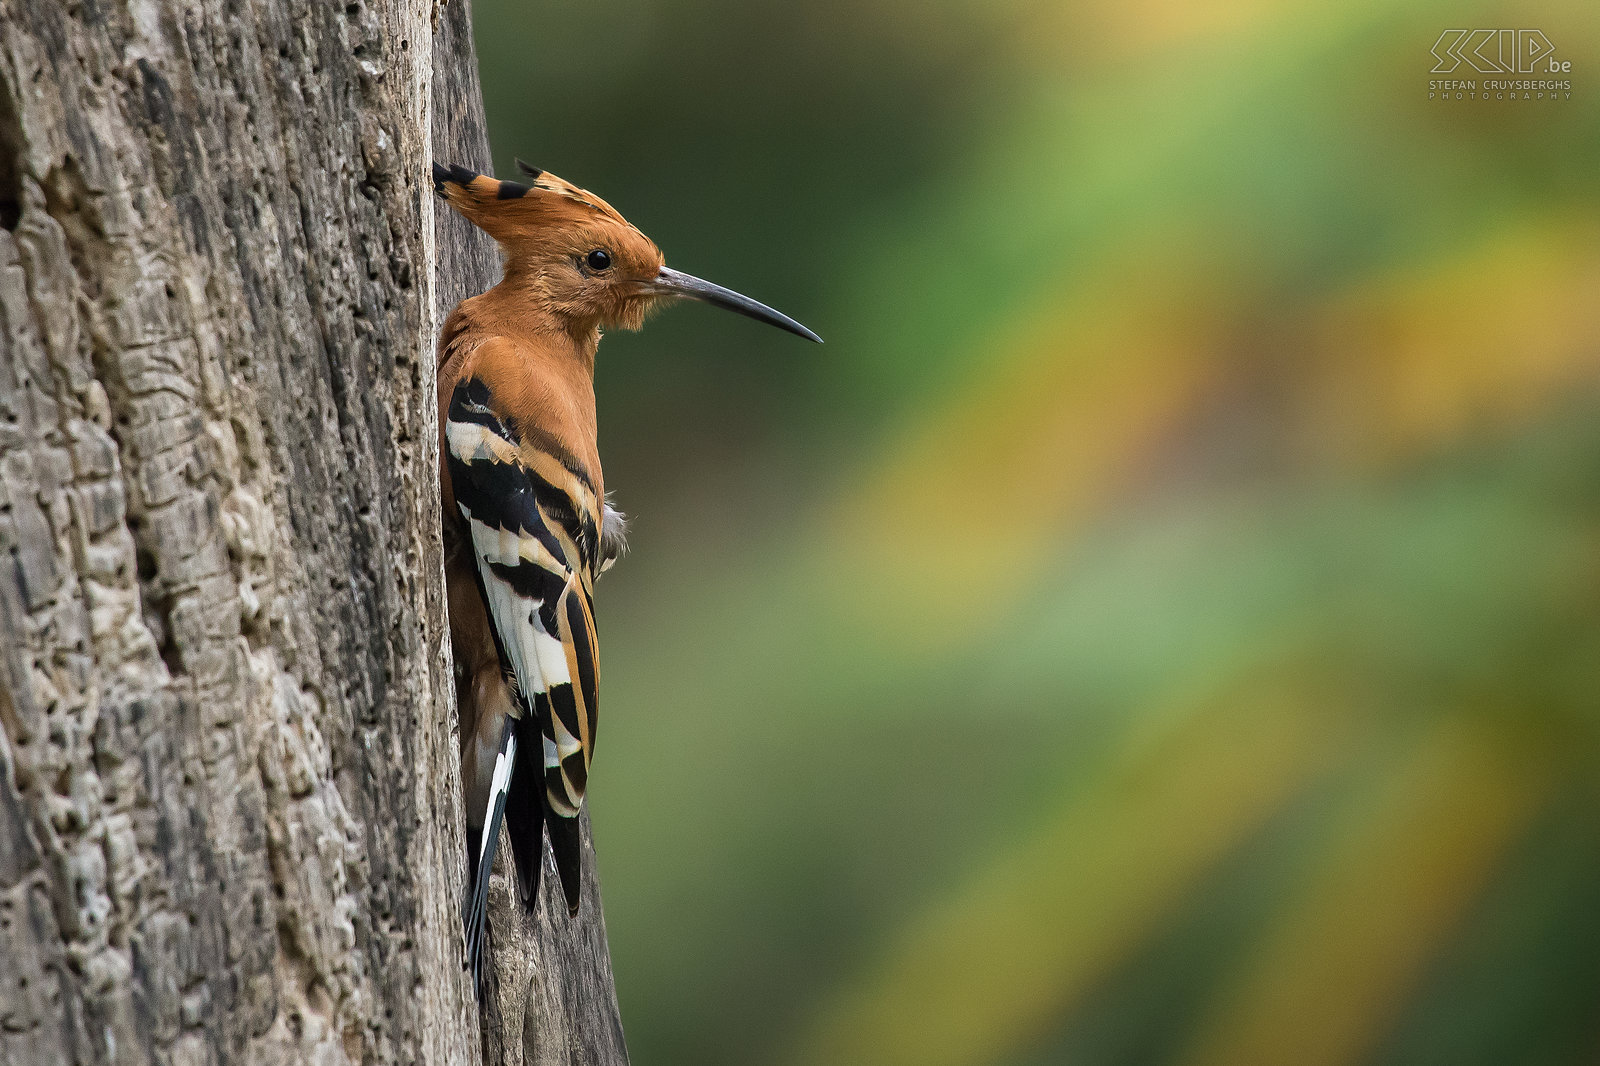 Lake Naivasha - Hoopoe At the campsite at Lake Naivasha there is a lot of bird life. There I made this photo of a hoopoe (Upupa epops) which is a brown-orange bird notable for its distinctive crown of feathers. Stefan Cruysberghs